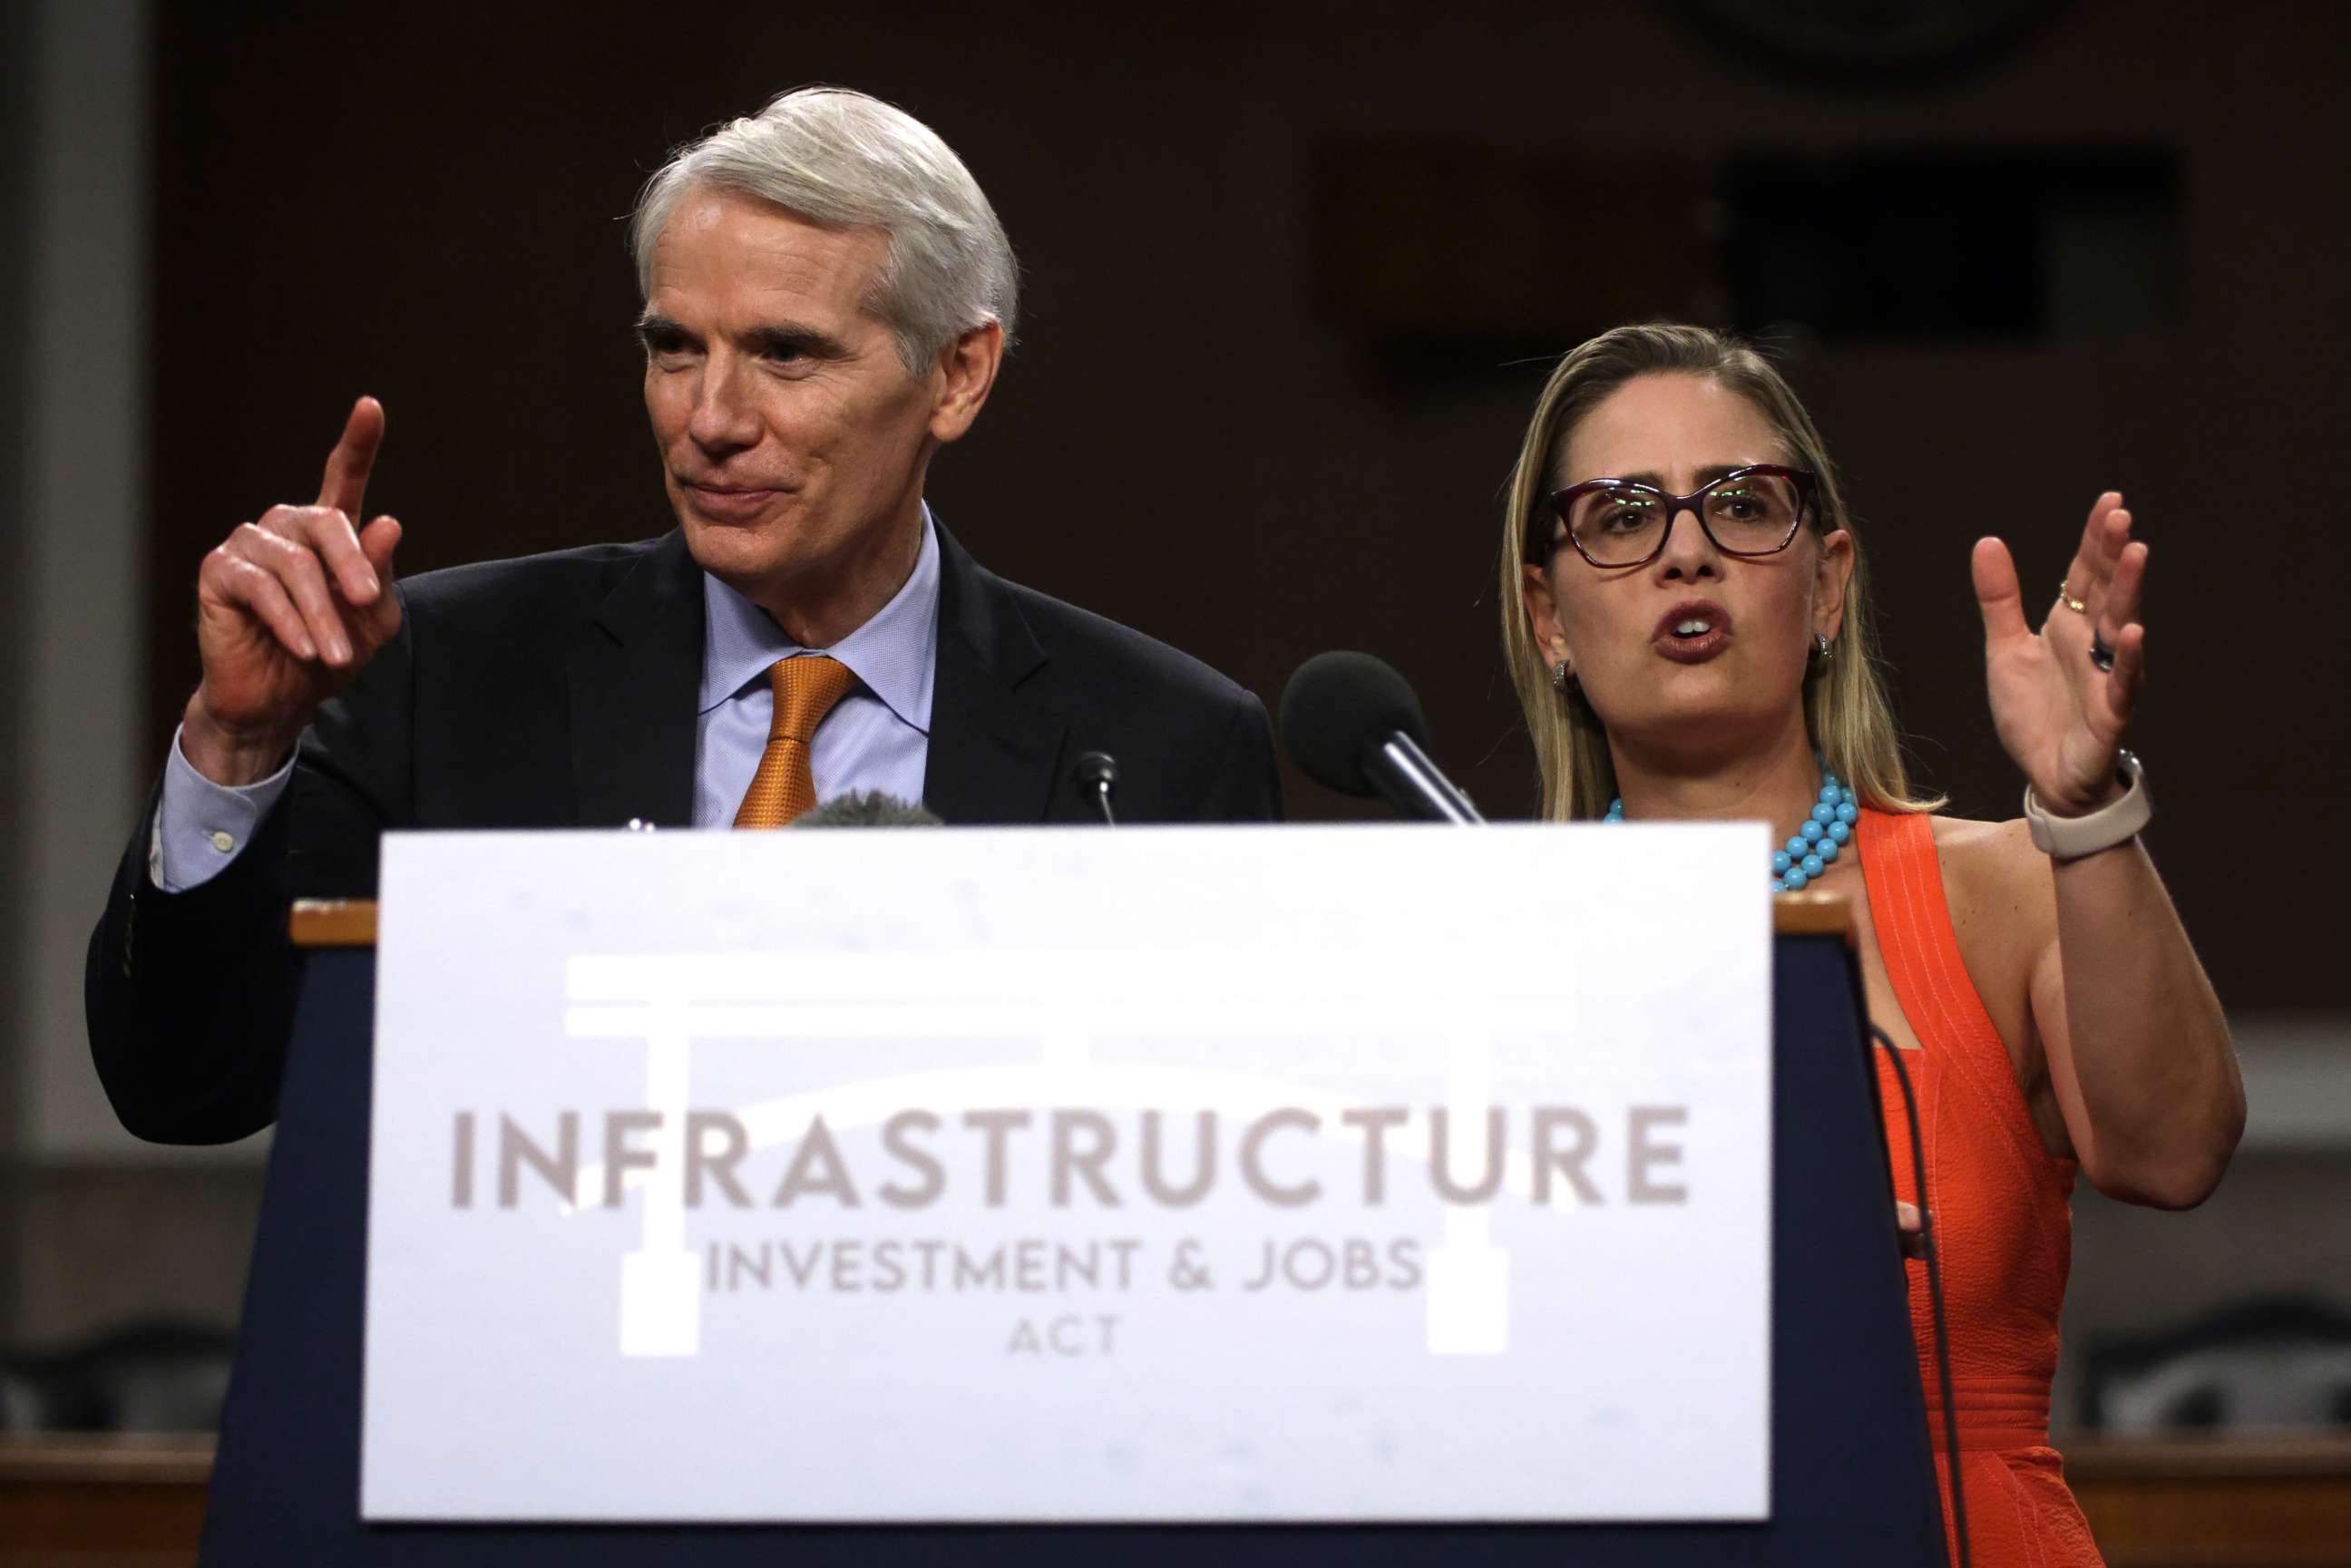 PHOTO: *** BESTPIX *** WASHINGTON, DC - JULY 28:  U.S. Sen. Rob Portman (R-OH) (L) and Sen. Kyrsten Sinema (D-AZ) (R) answer questions from members of the press during a news conference after a procedural vote for the bipartisan infrastructure framework.